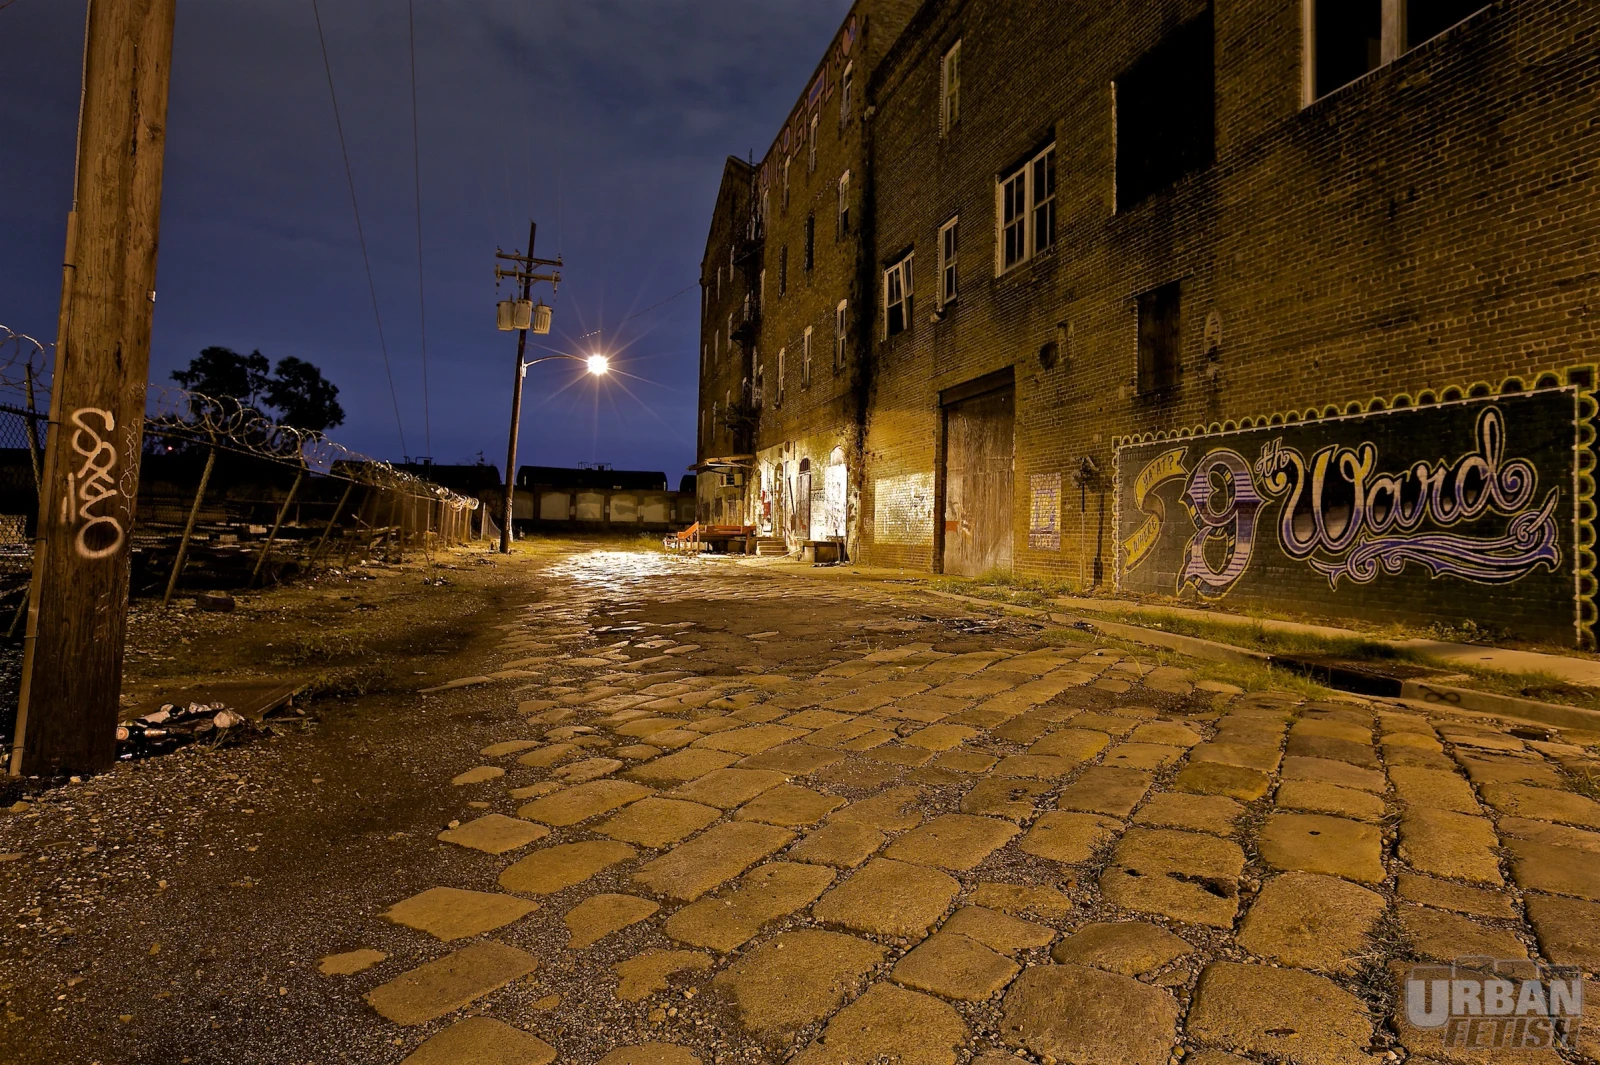 3am in the 9th Ward - Featured image